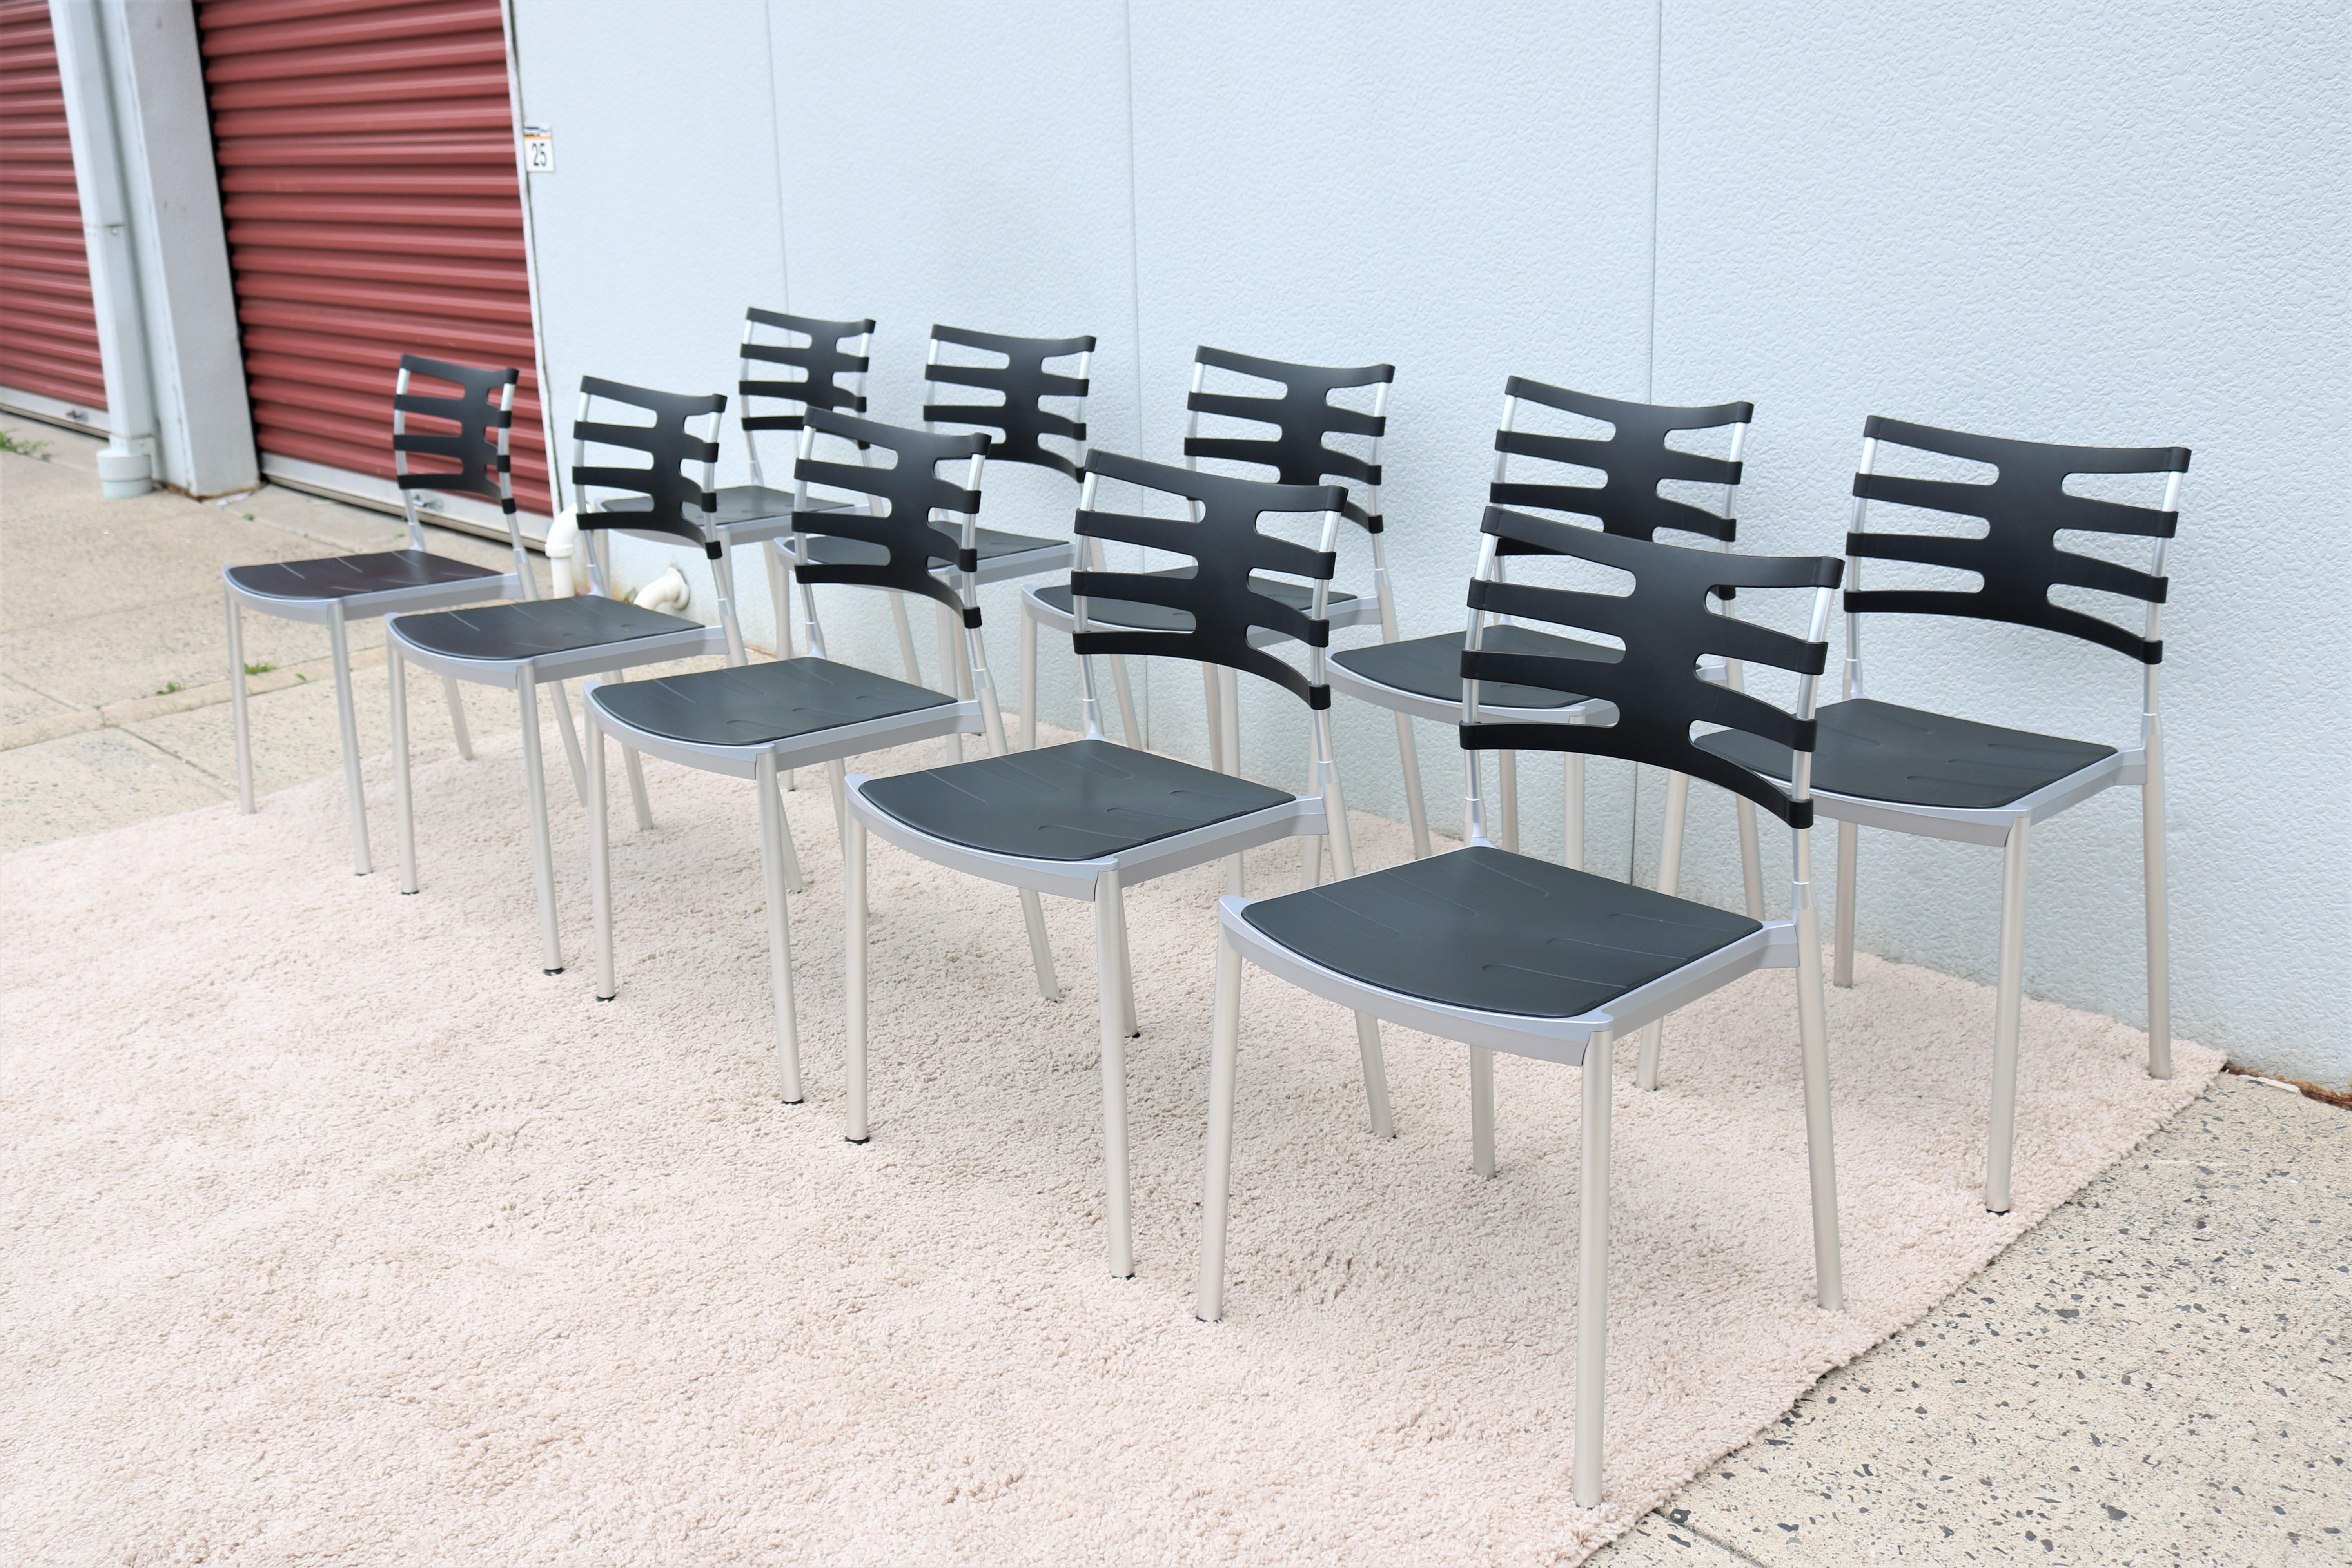 These sleek and minimalist Ice chairs are stylish and functional, Ice is Fritz Hansen's first chair that is equally suitable for both indoor and outdoor use.
The lightweight design and stacking feature make it the perfect chair for outdoor